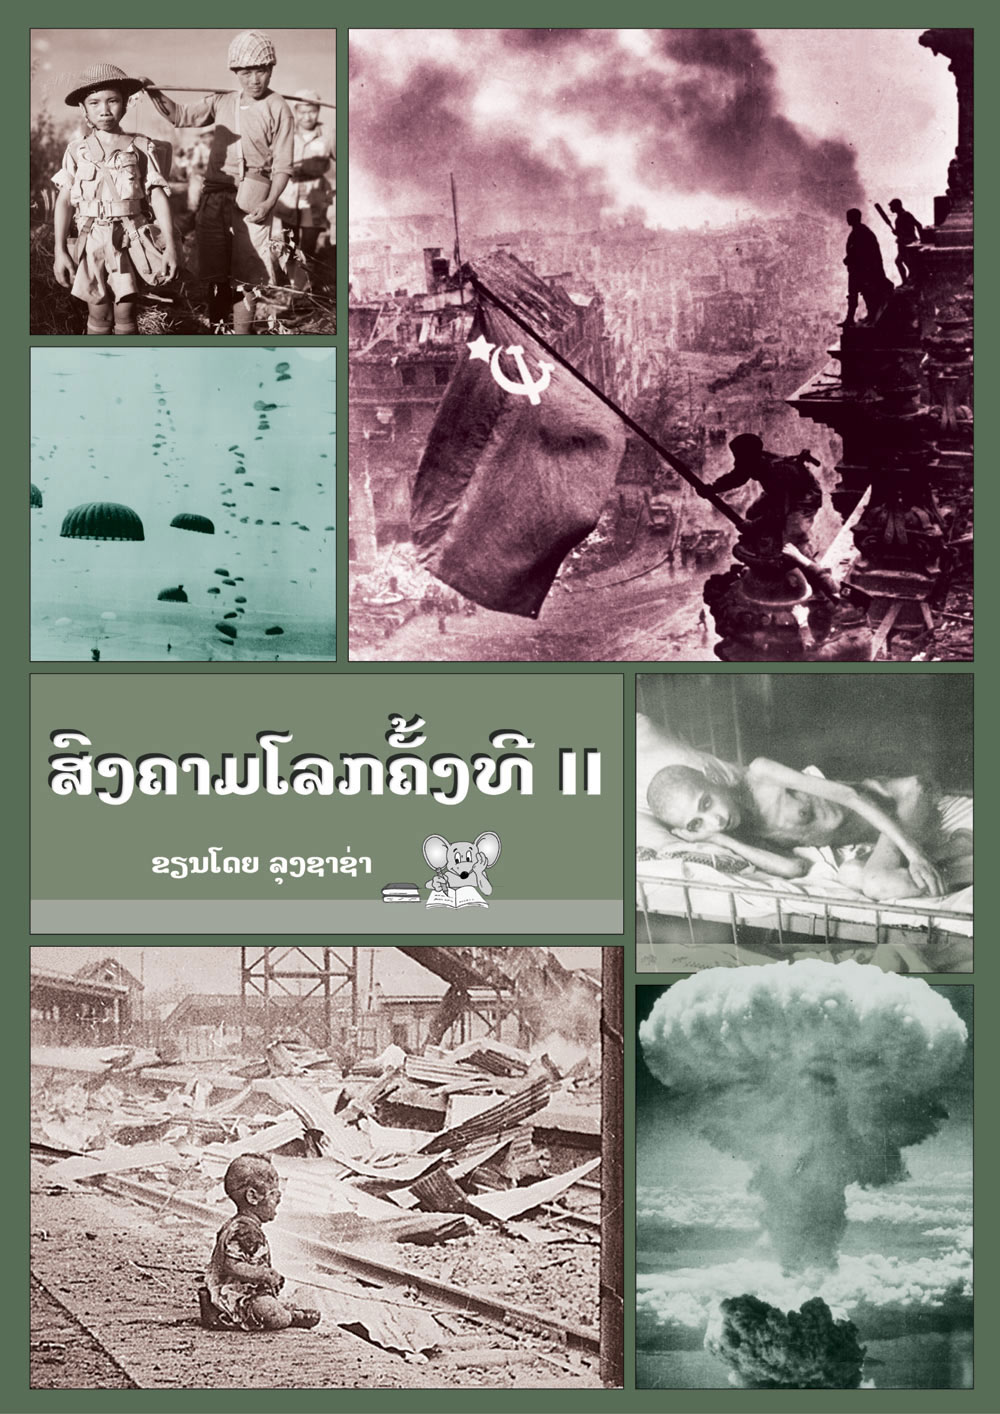 World War II large book cover, published in Lao language